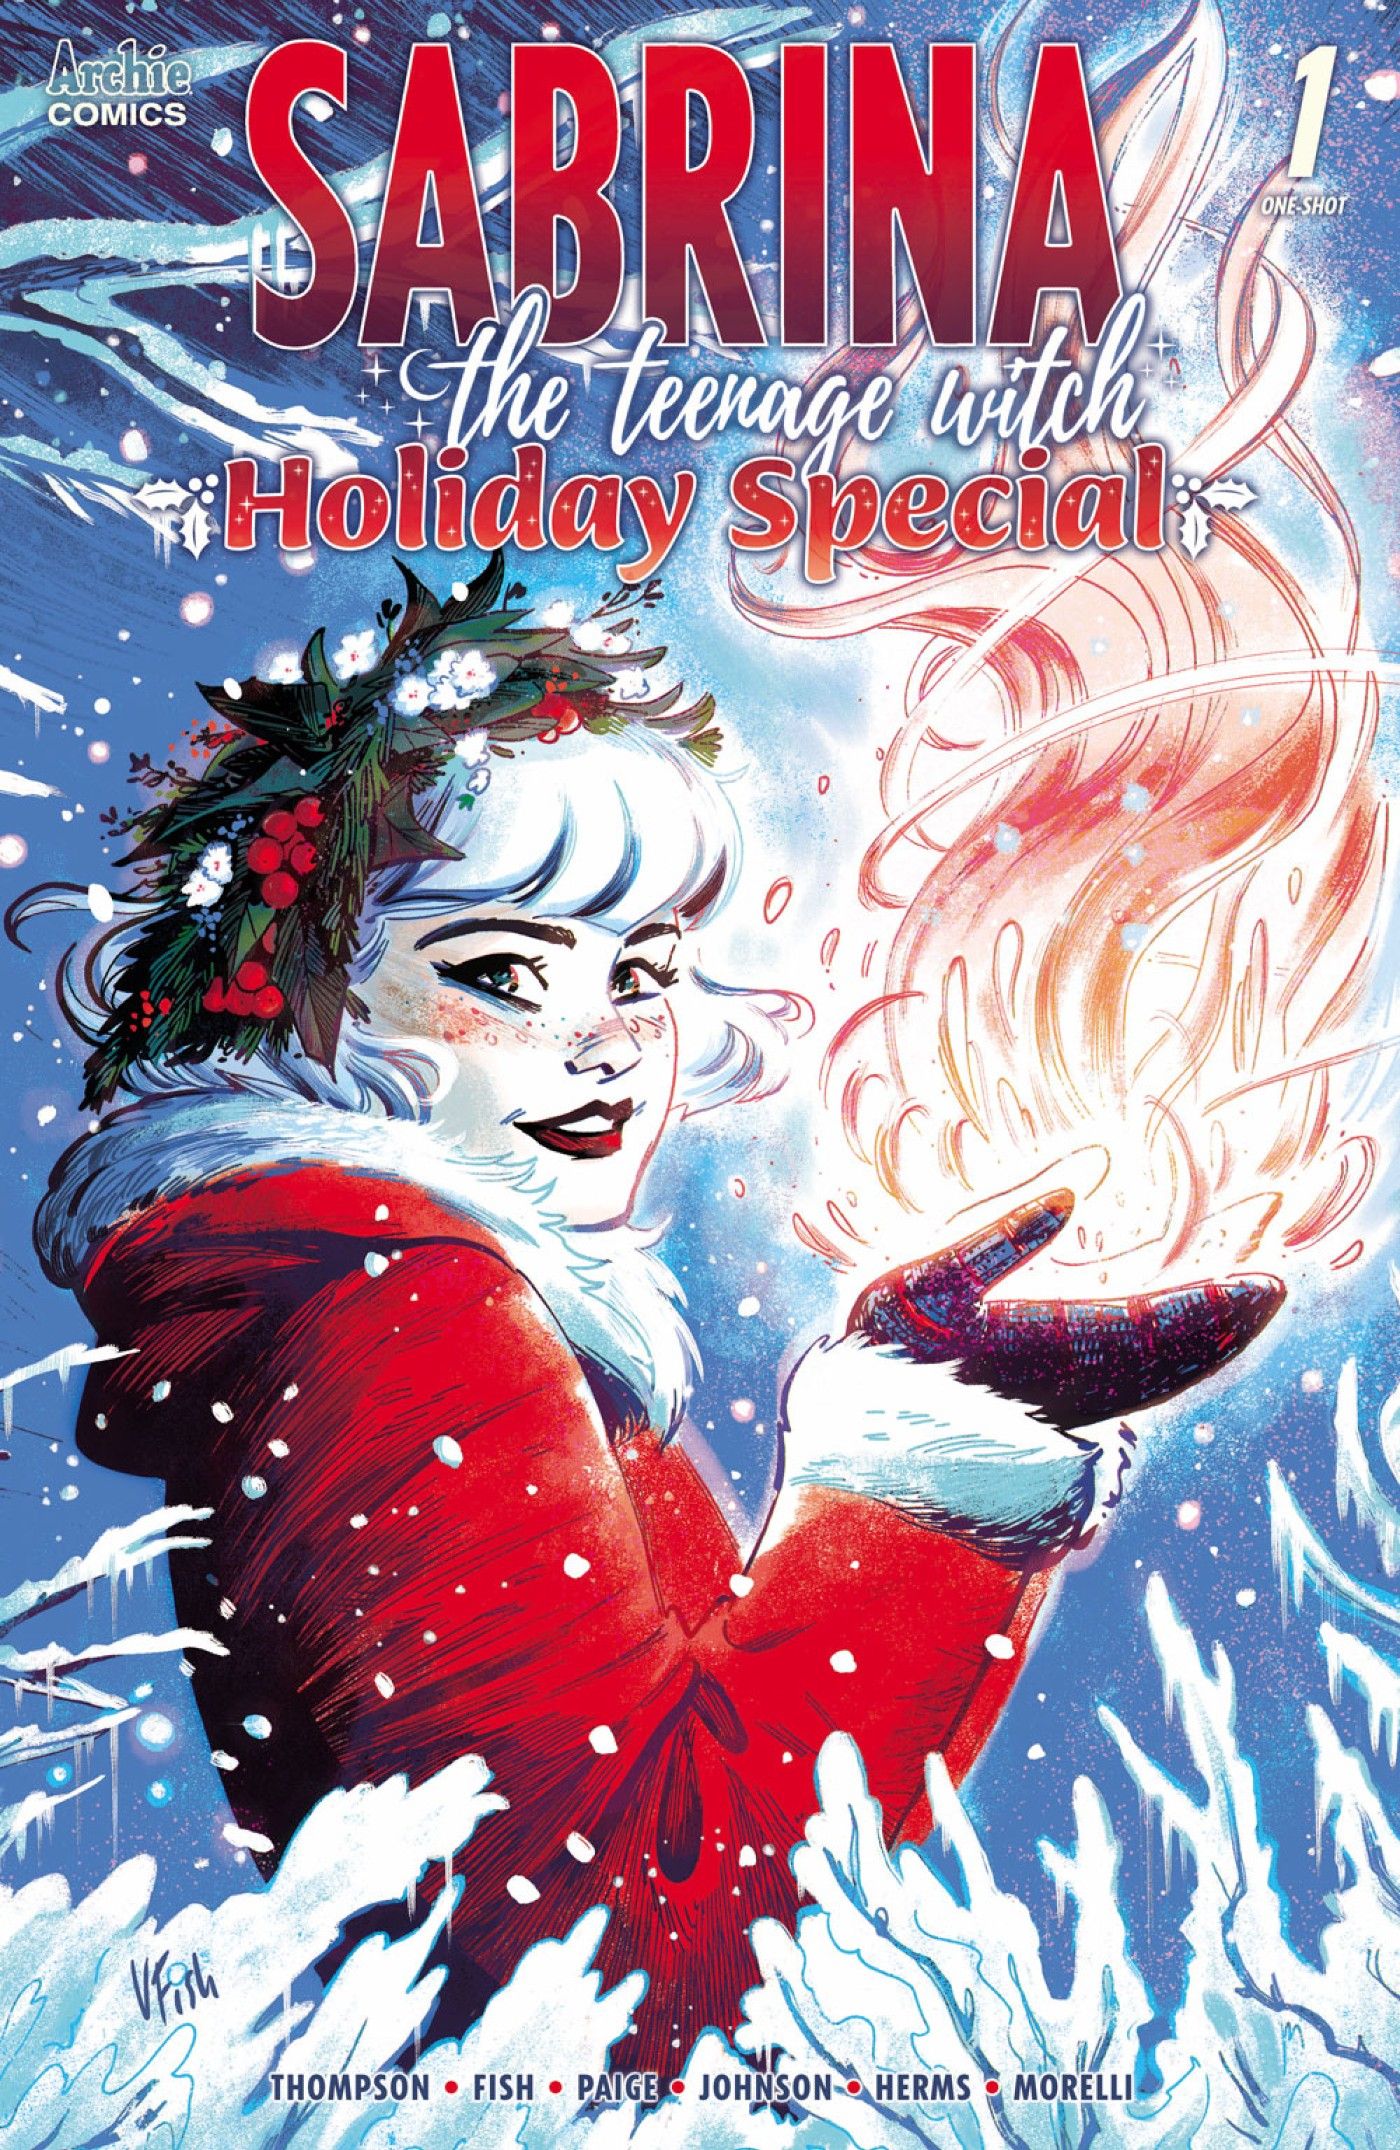 Sabrina Returns for New Holiday-Themed Magical Adventure